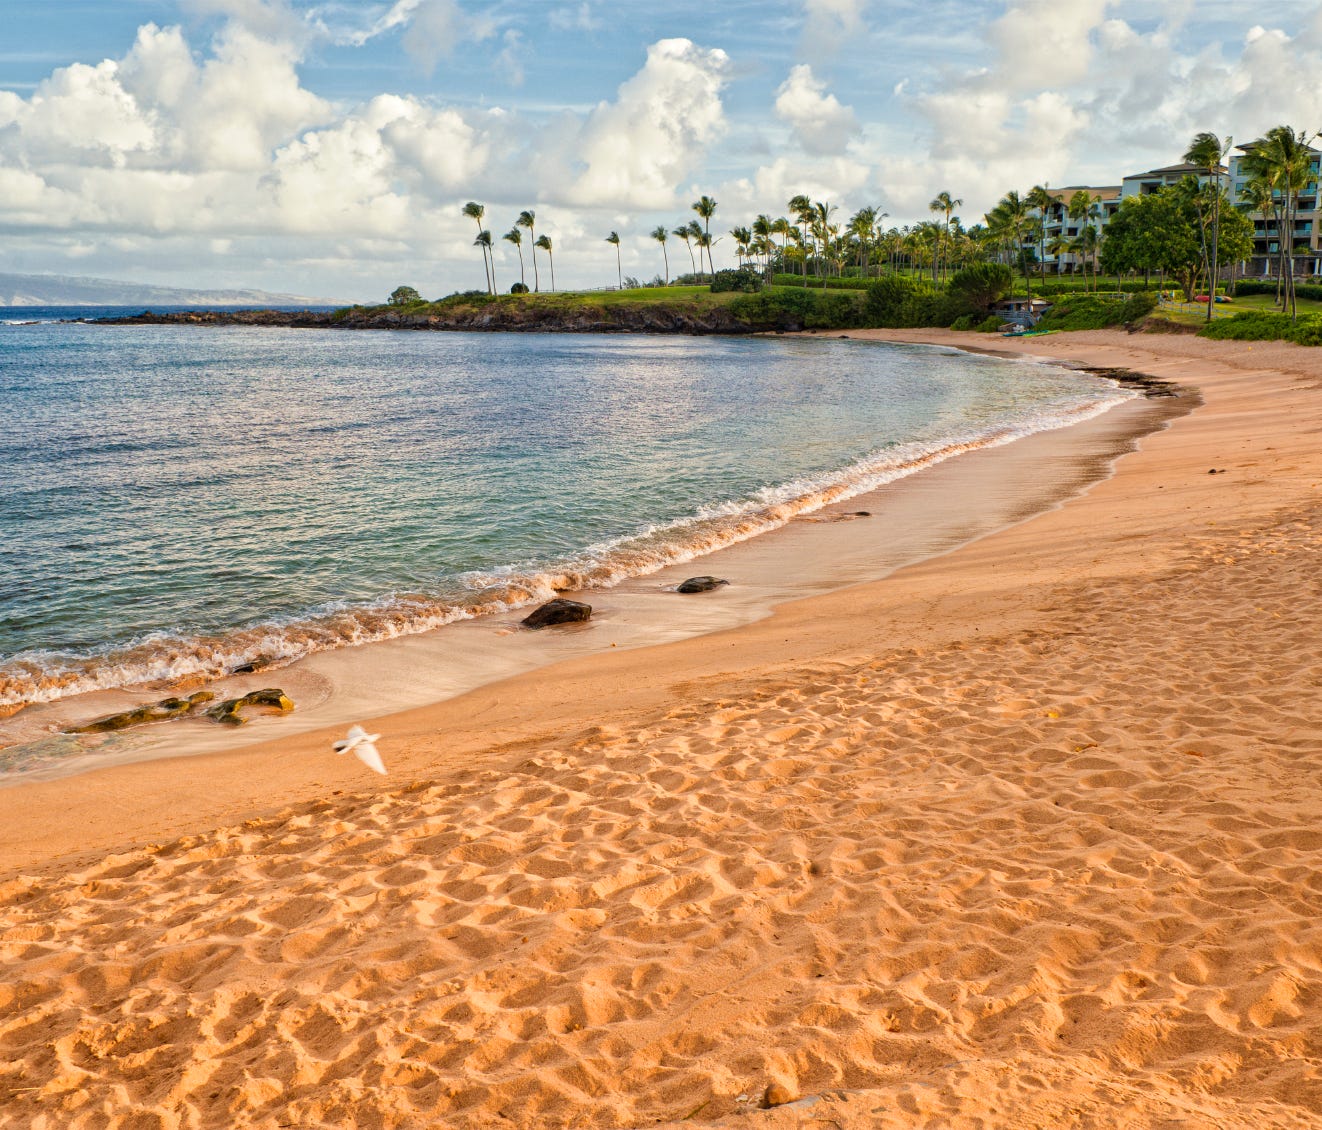 Kapalua Bay Beach in Maui, Hawaii, is the USA's best beach, according to an annual survey by 